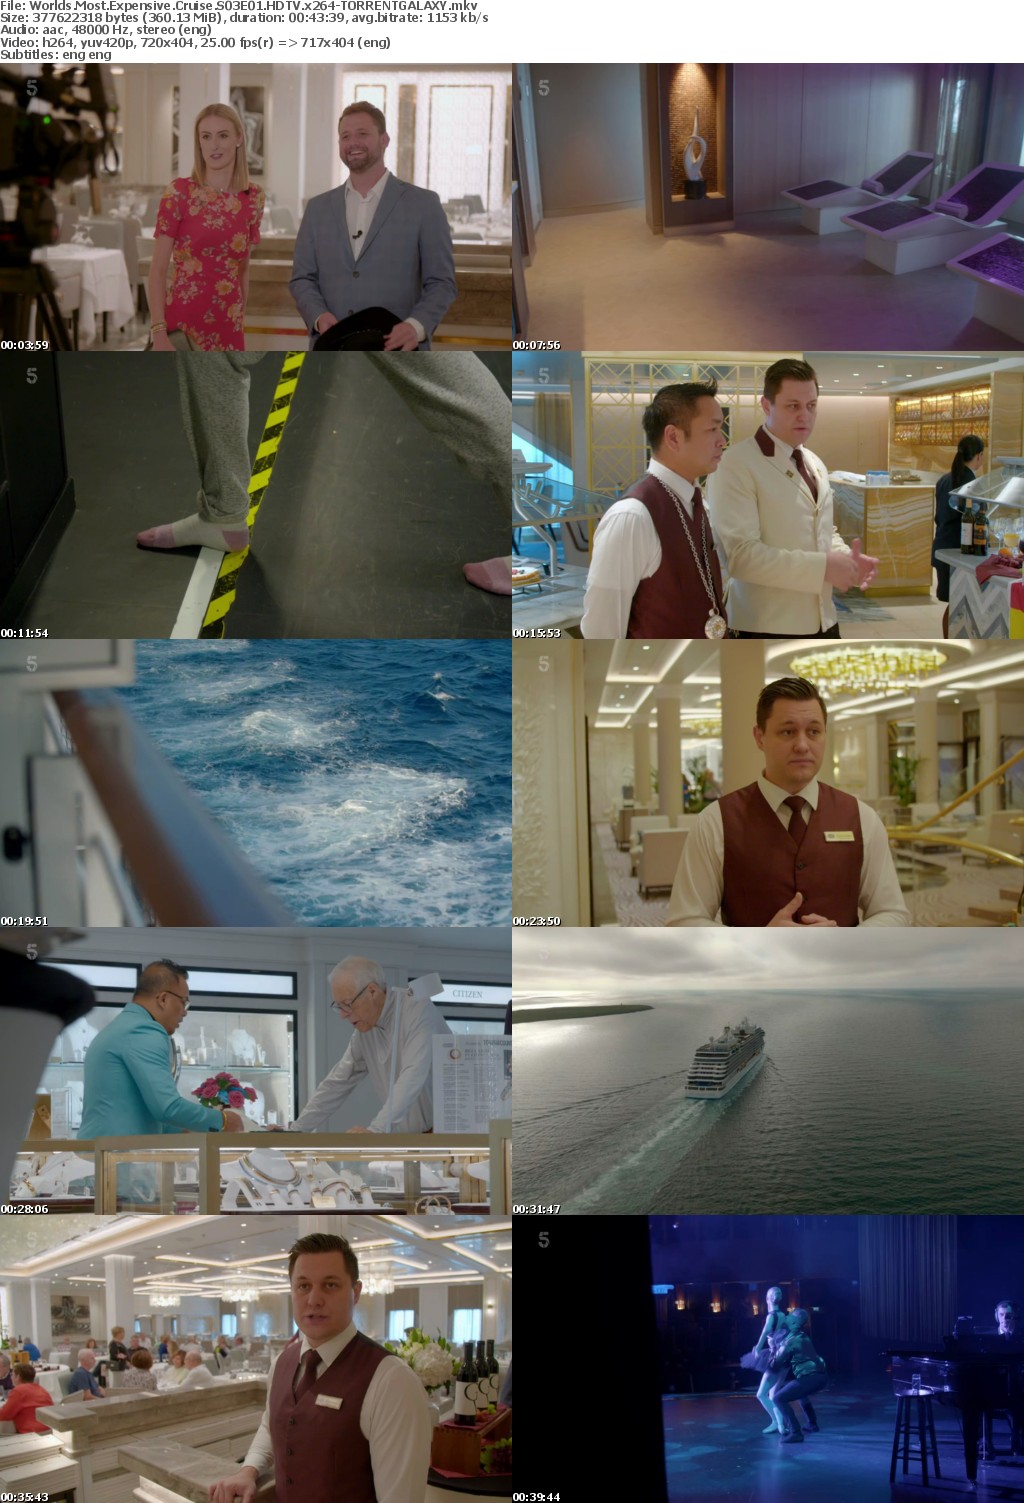 Worlds Most Expensive Cruise S03E01 HDTV x264-GALAXY